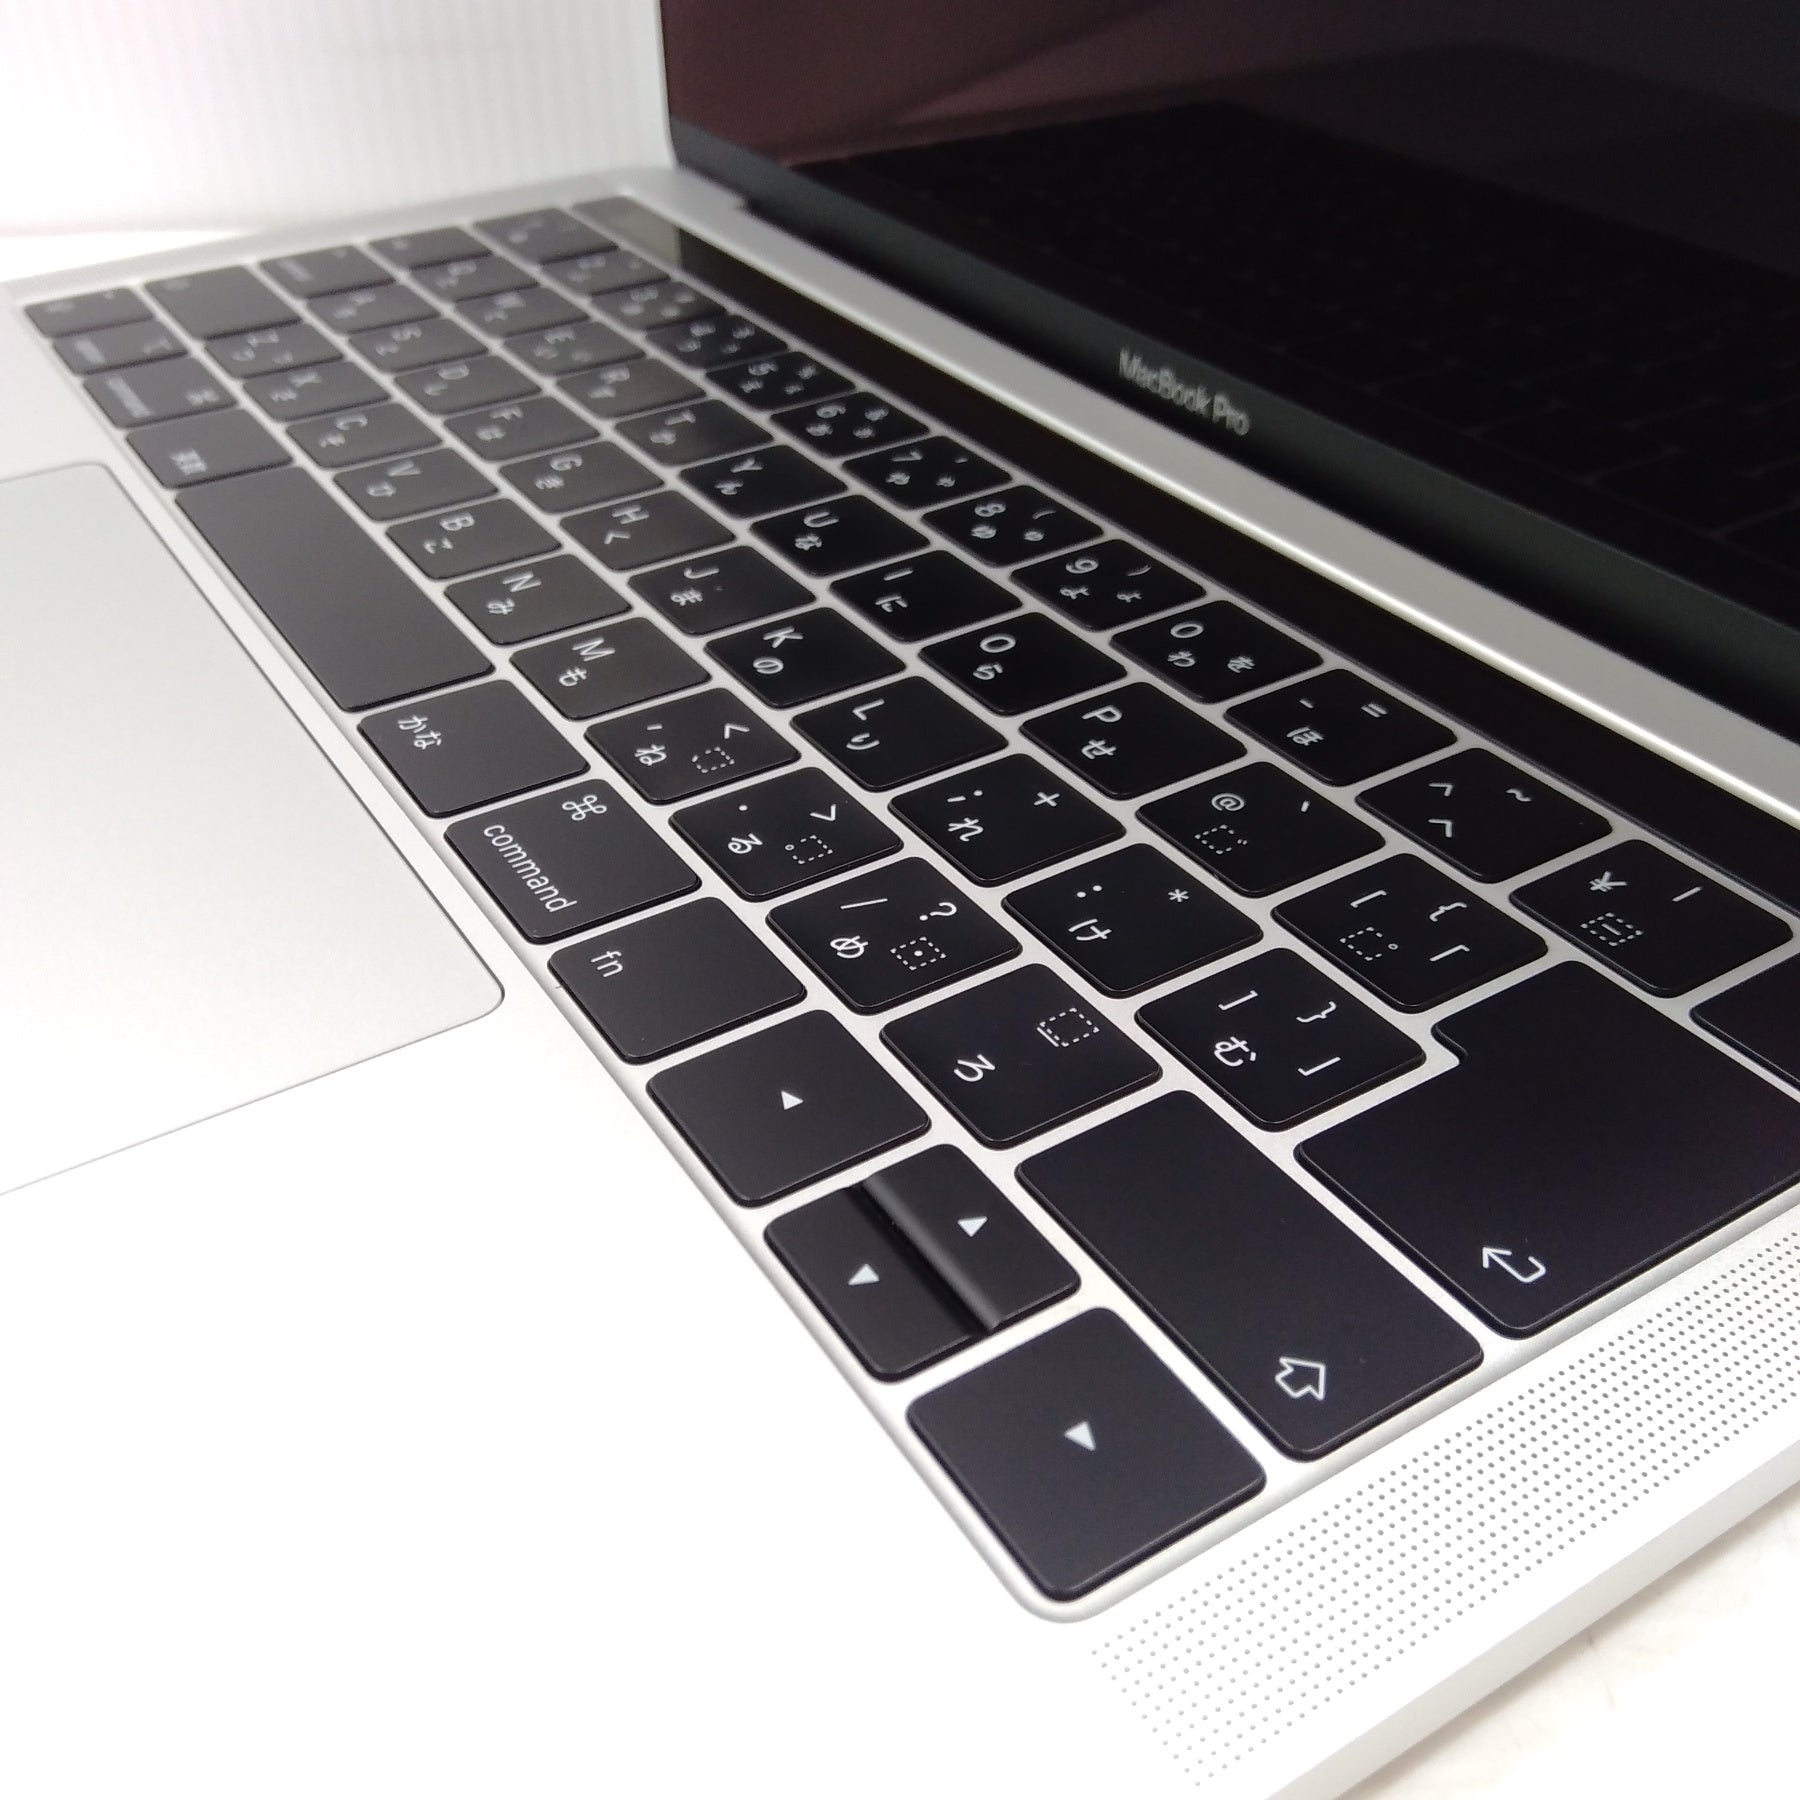 MacBook pro 2019 touch bar 不具合なし - ノートパソコン